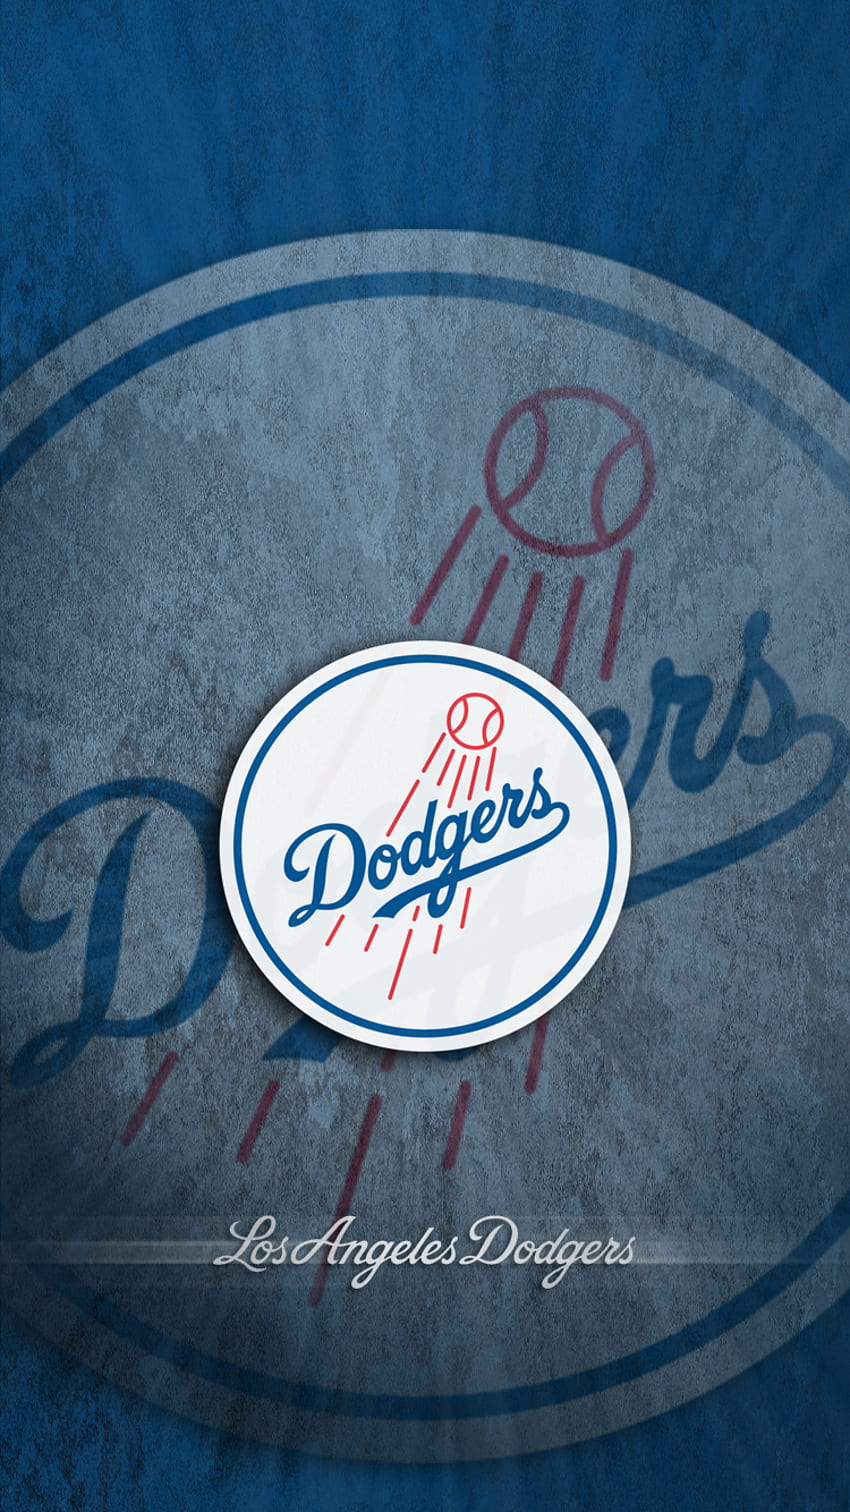 Some Dodger wallpaper for you all  rDodgers